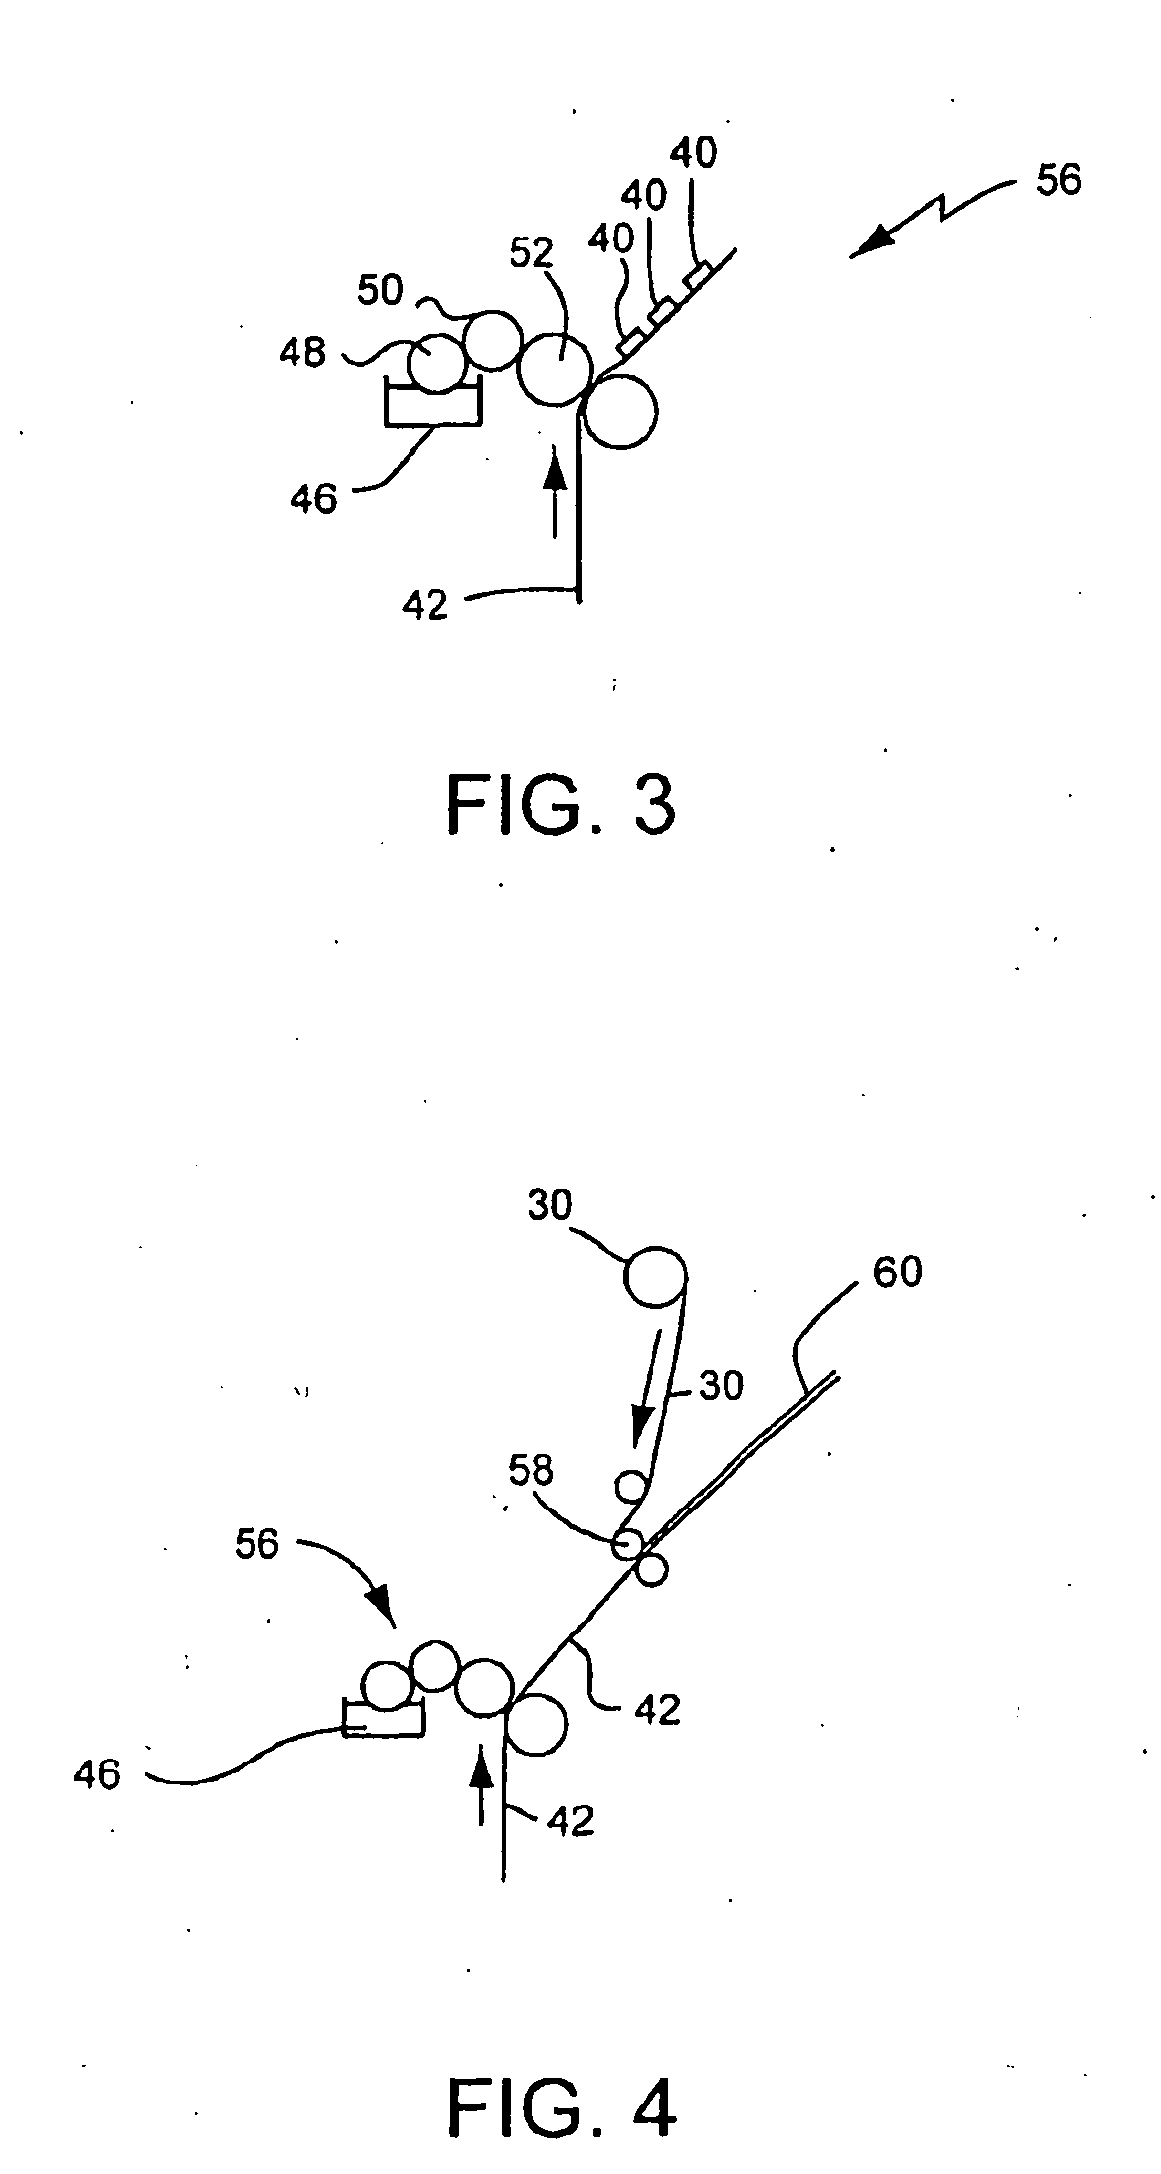 Method and Material for Manufacturing Electrically Conductive Patterns, Including Radio Frequency Identification (RFID) Antennas